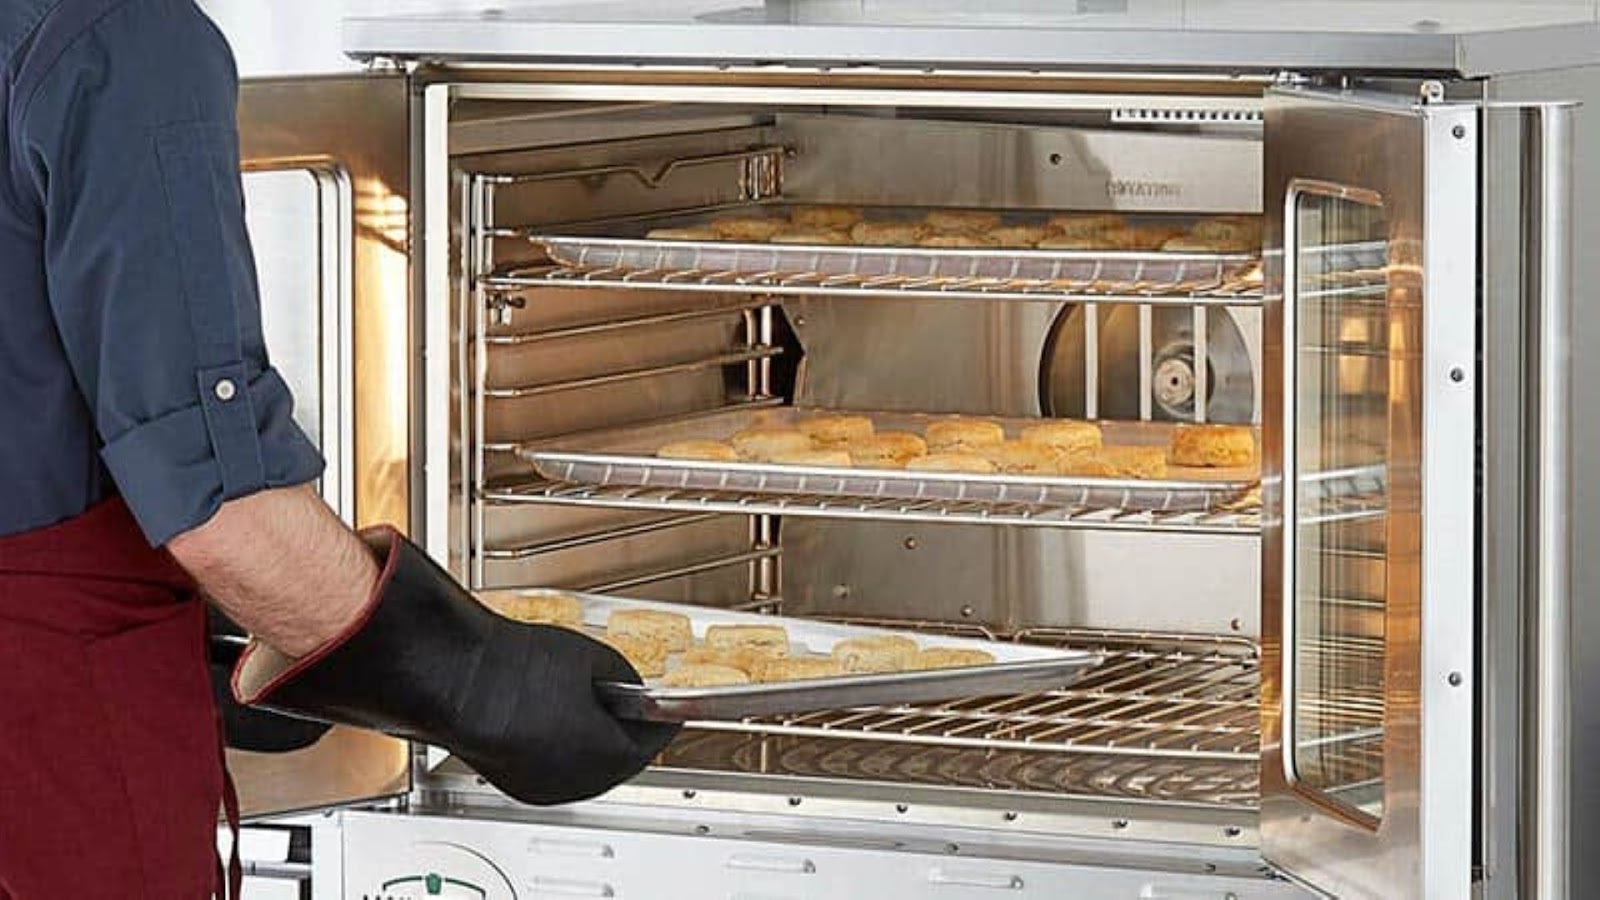 Convection Oven: Overview